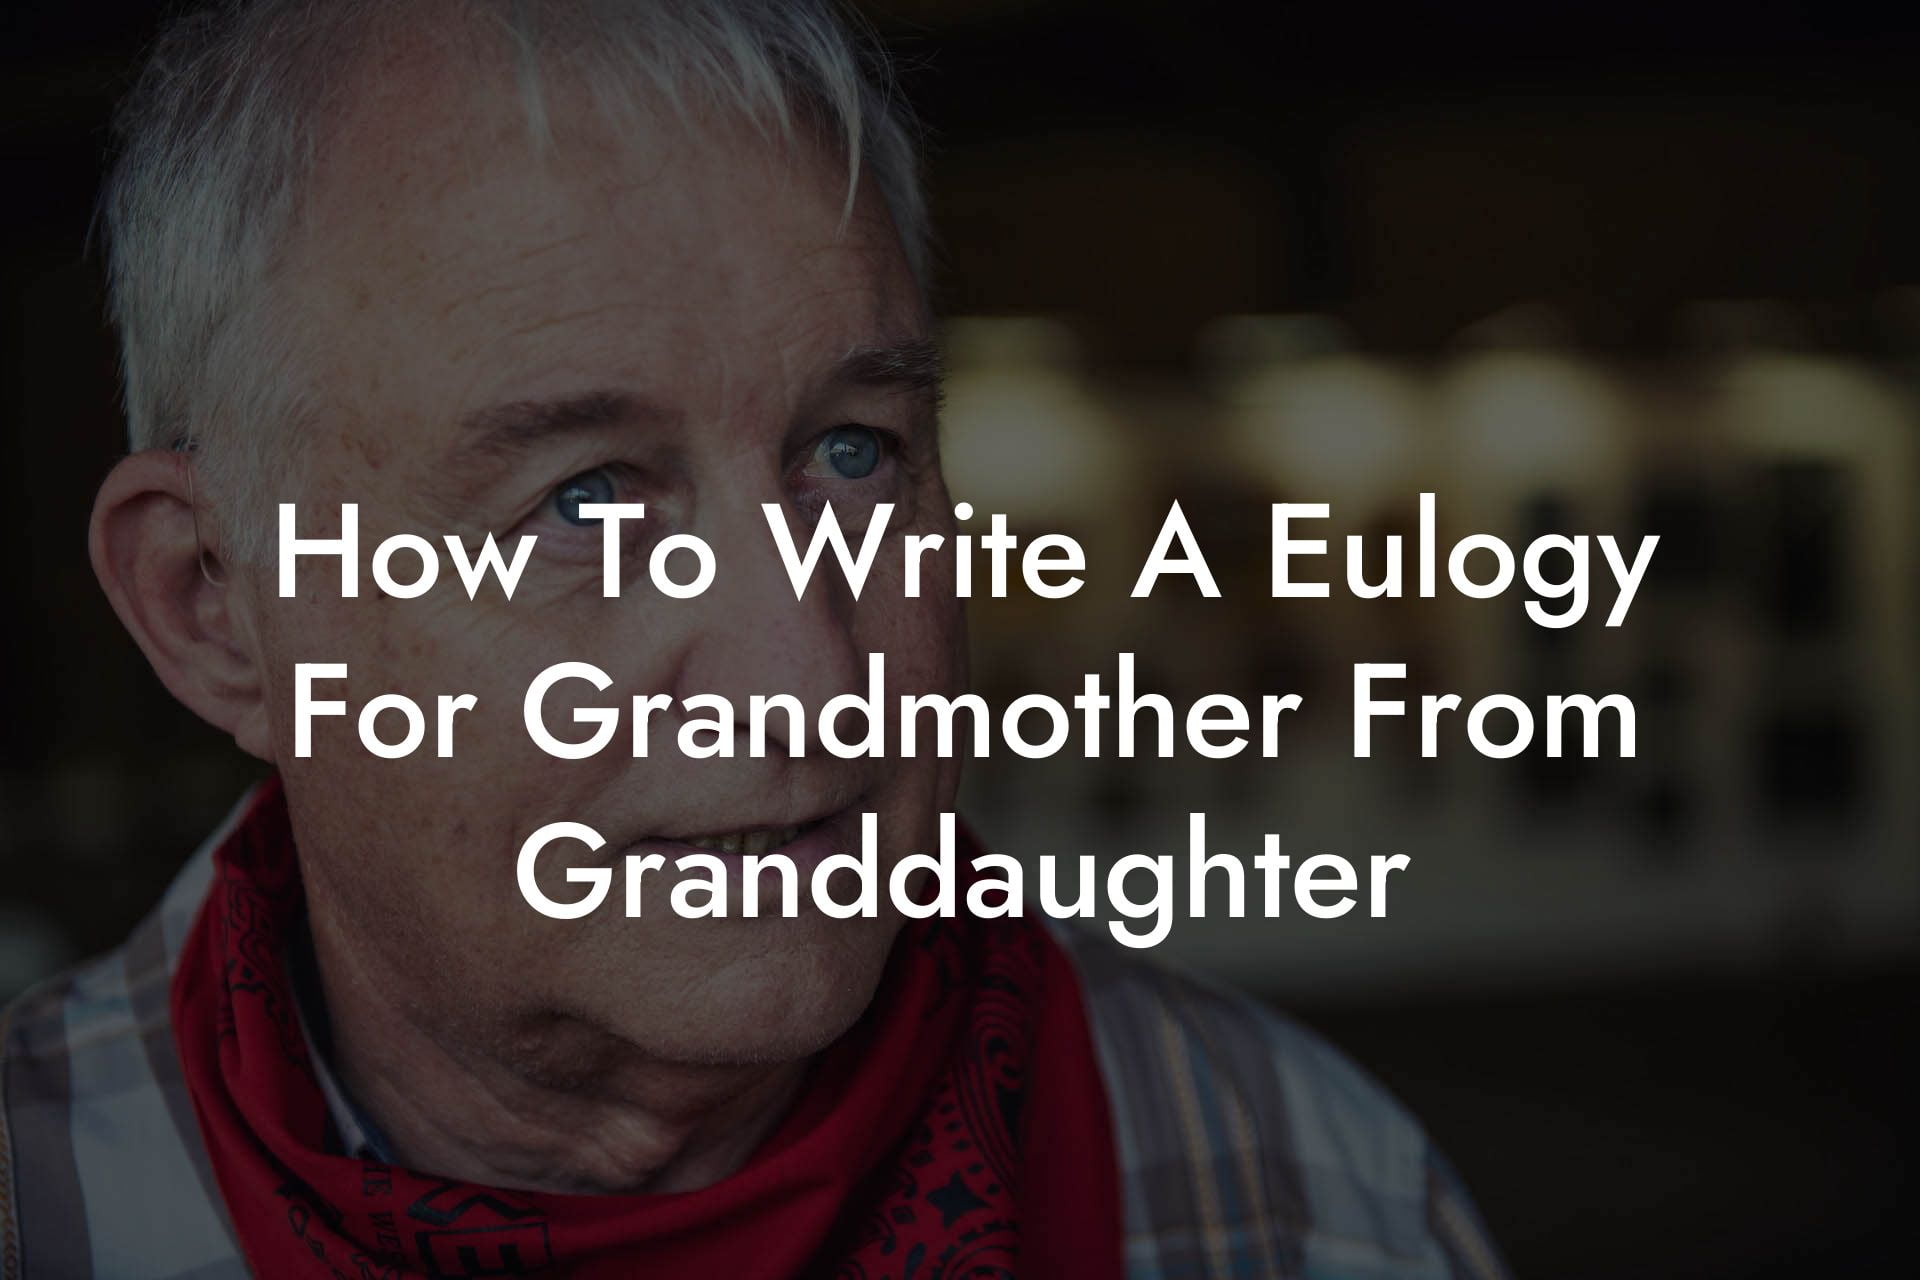 How To Write A Eulogy For Grandmother From Granddaughter